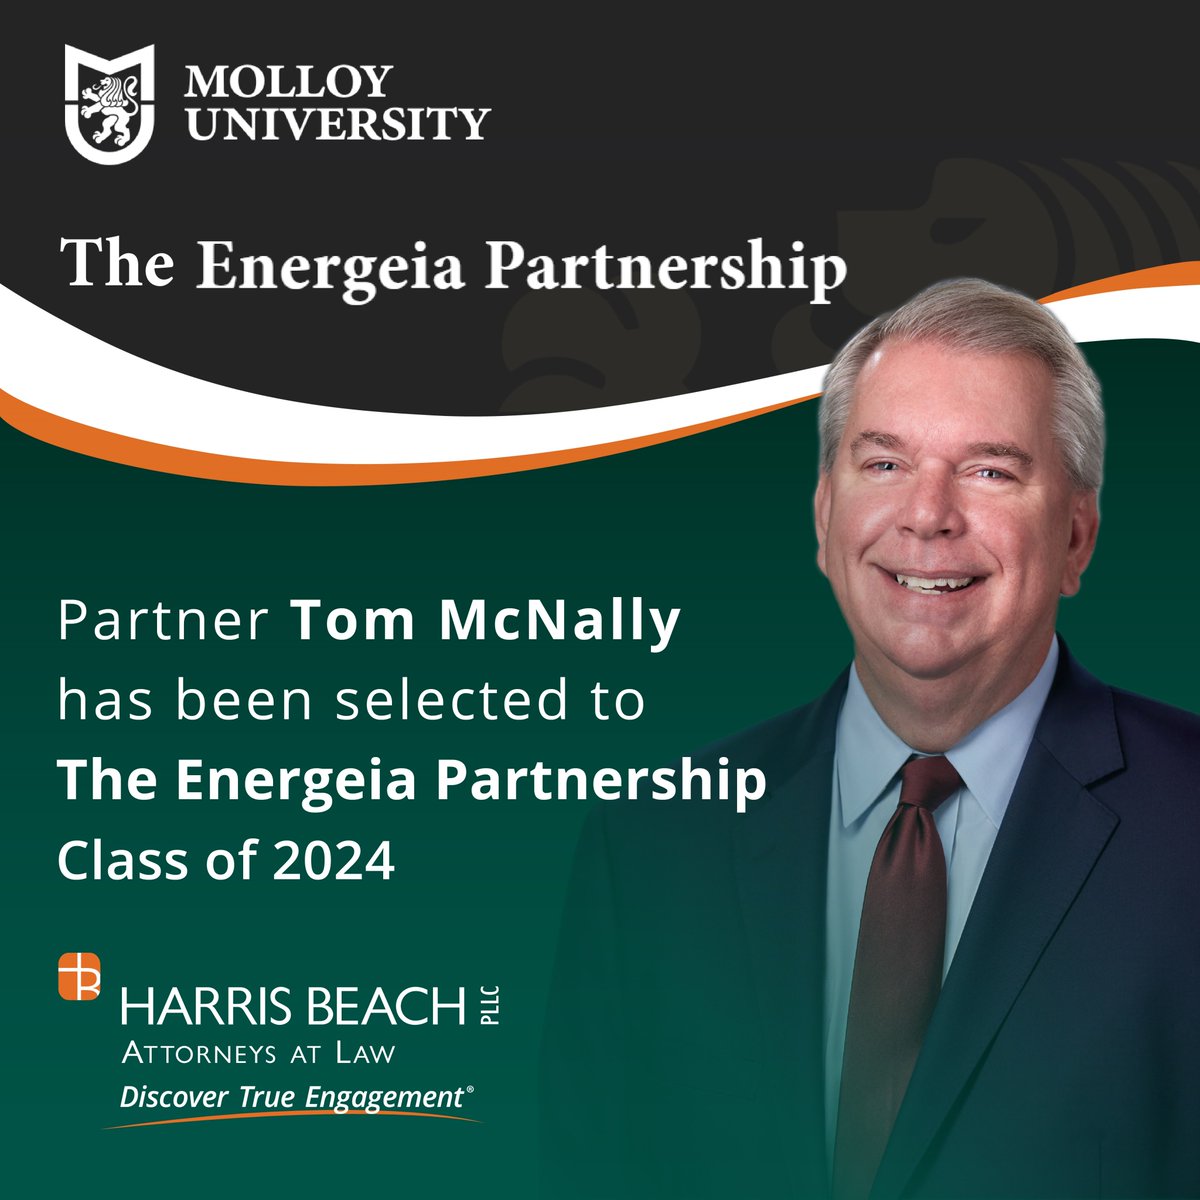 Partner Thomas M. McNally has been selected to The Energeia Partnership Class of 2024. The Energeia Partnership brings together a diverse group of ethical leaders from Long Island's public, private and not-for-profit sectors to help address this region's most complex issues.